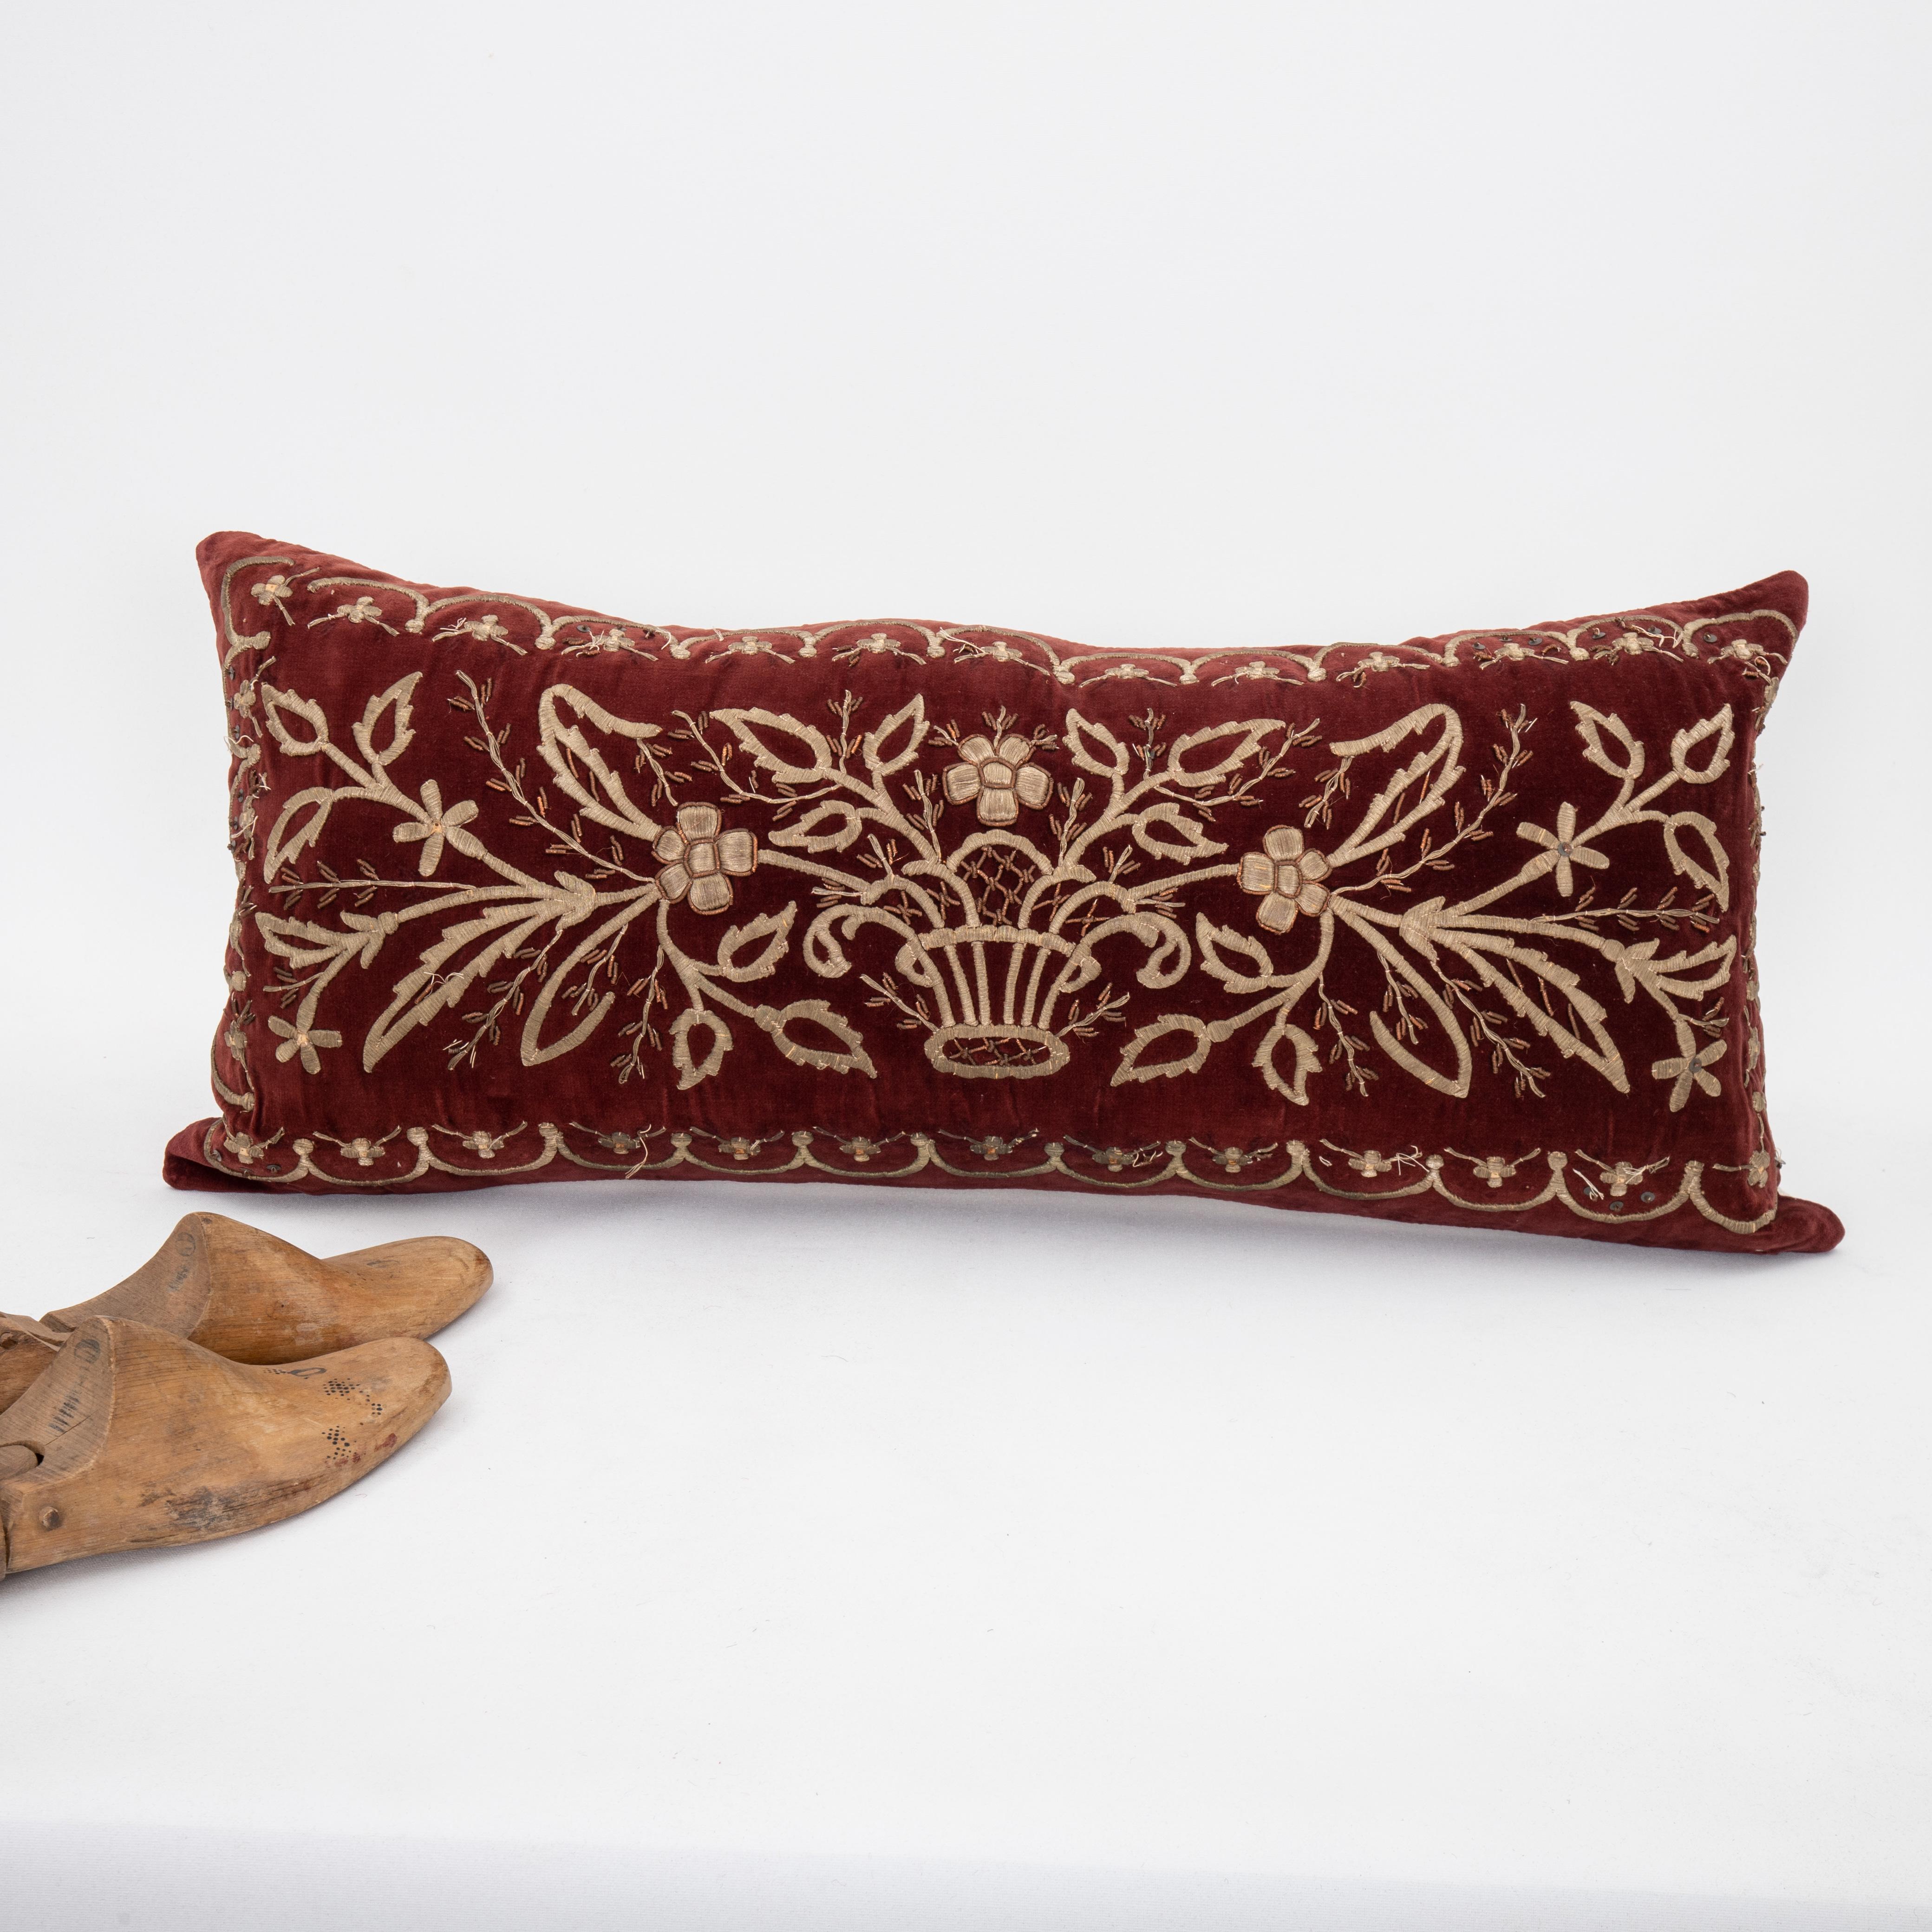 Metallic Thread Ottoman / Turkish Pillow Cover in Sarma Technique, late 19th / Early 20th C. For Sale